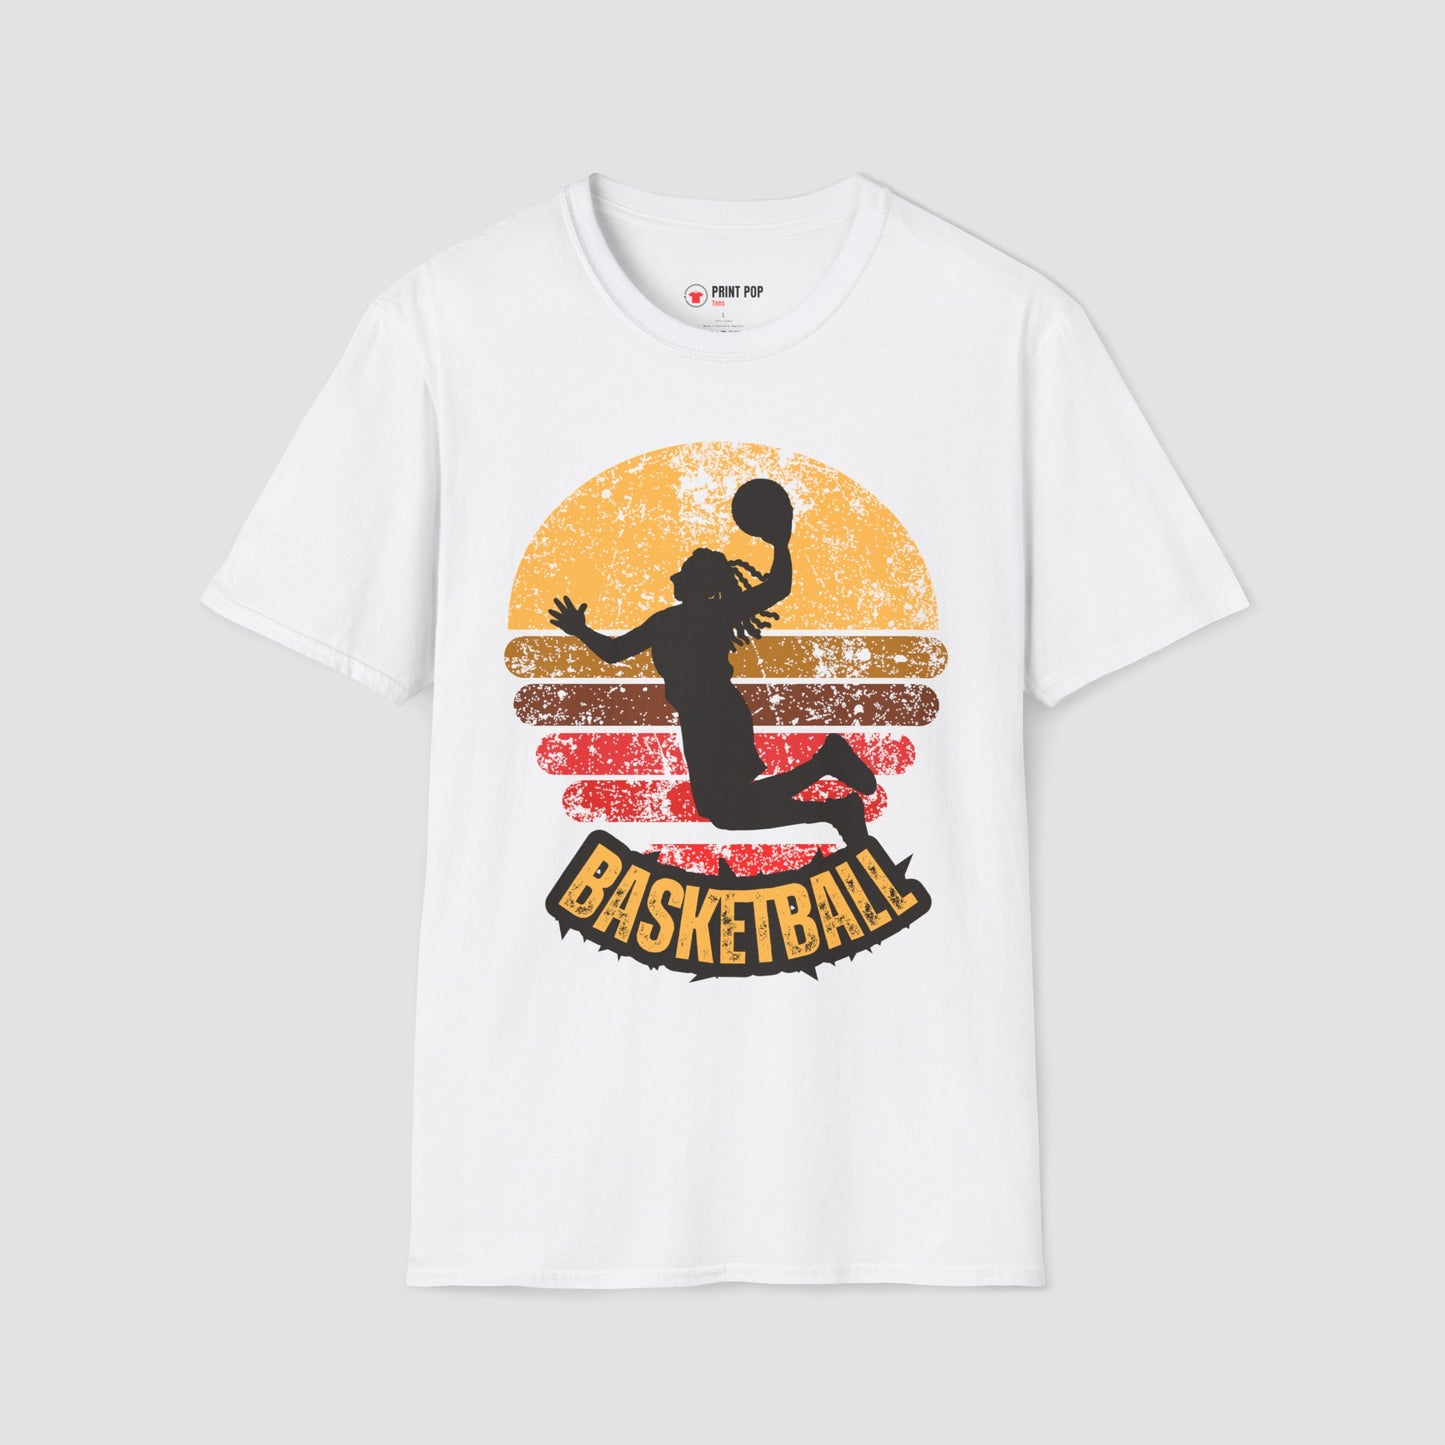 Basketball Unique Printed Tee